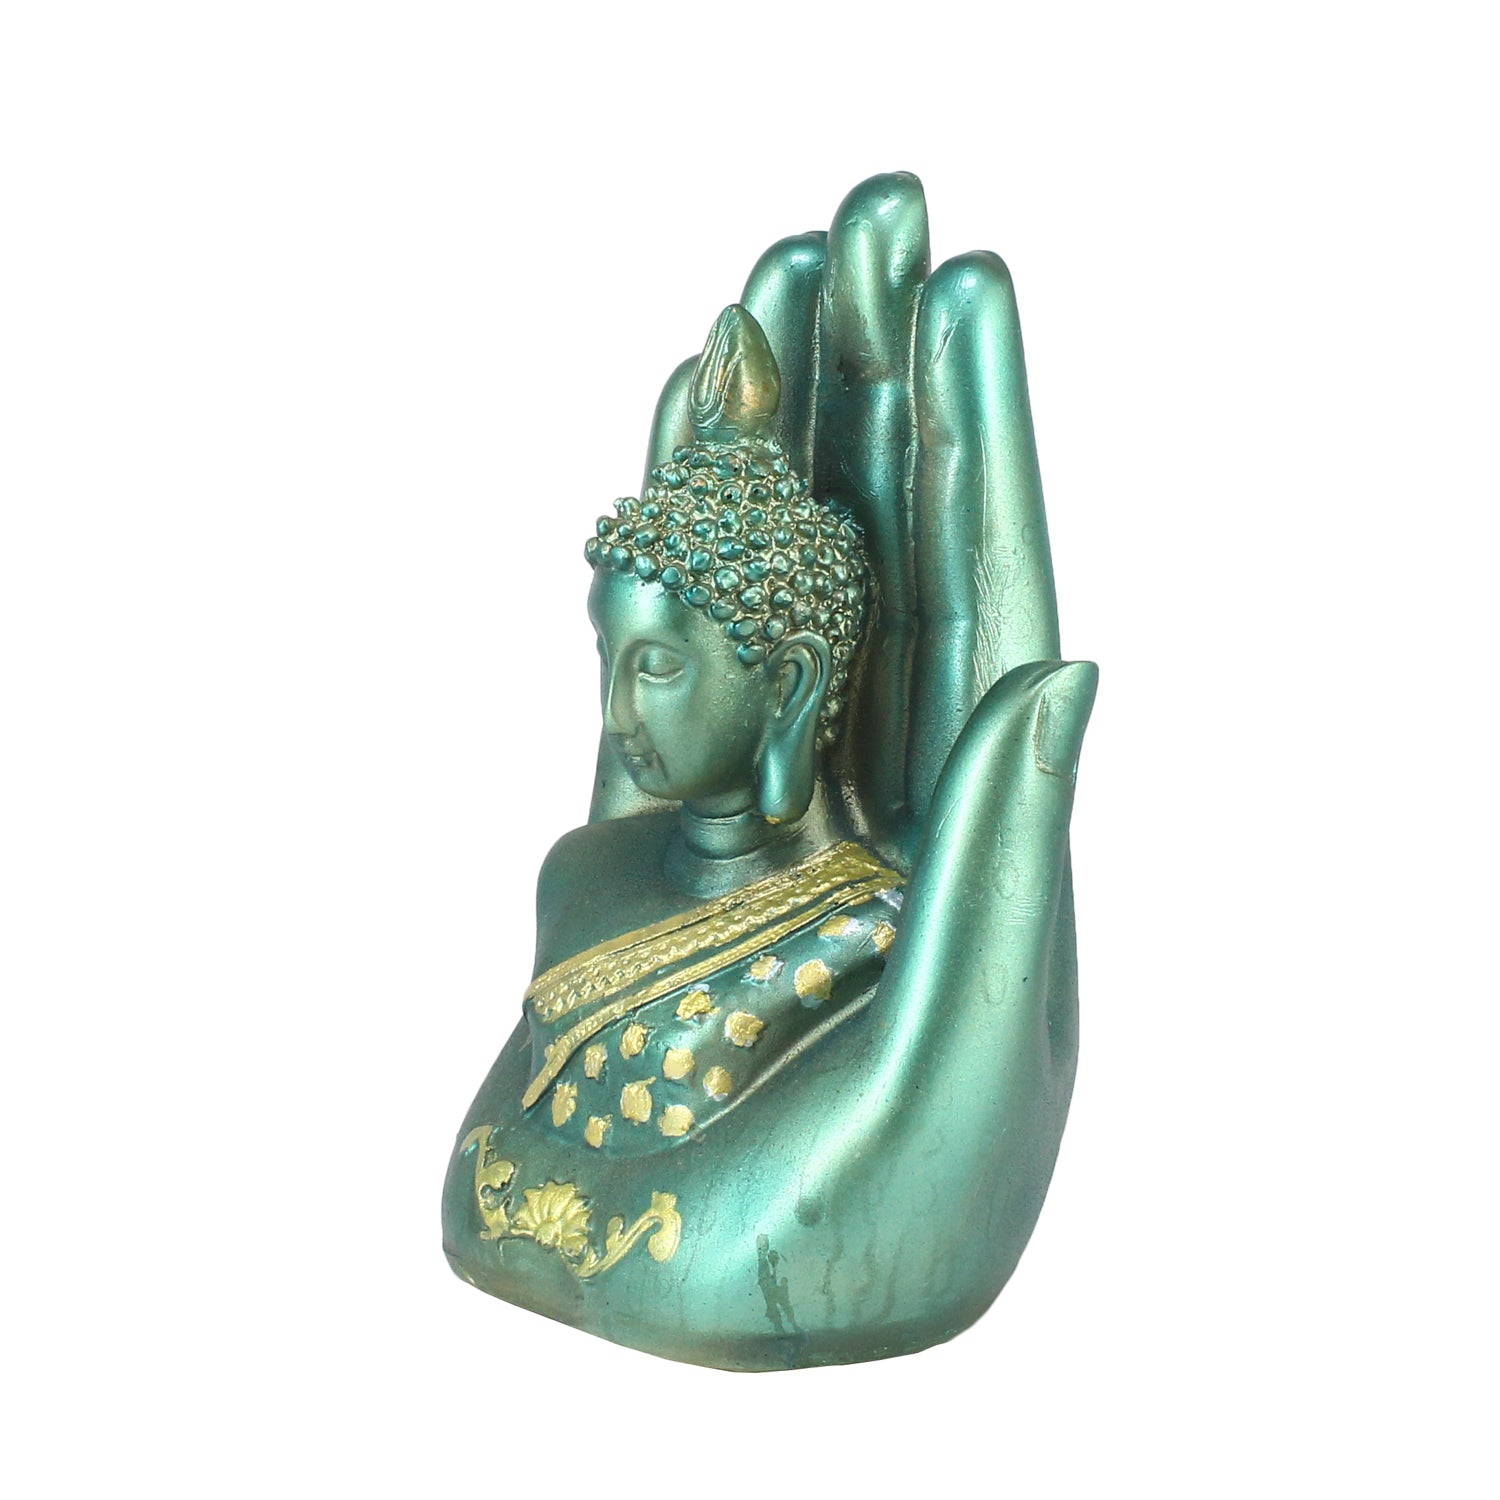 Teak and Golden Handcrafted Palm Buddha 4